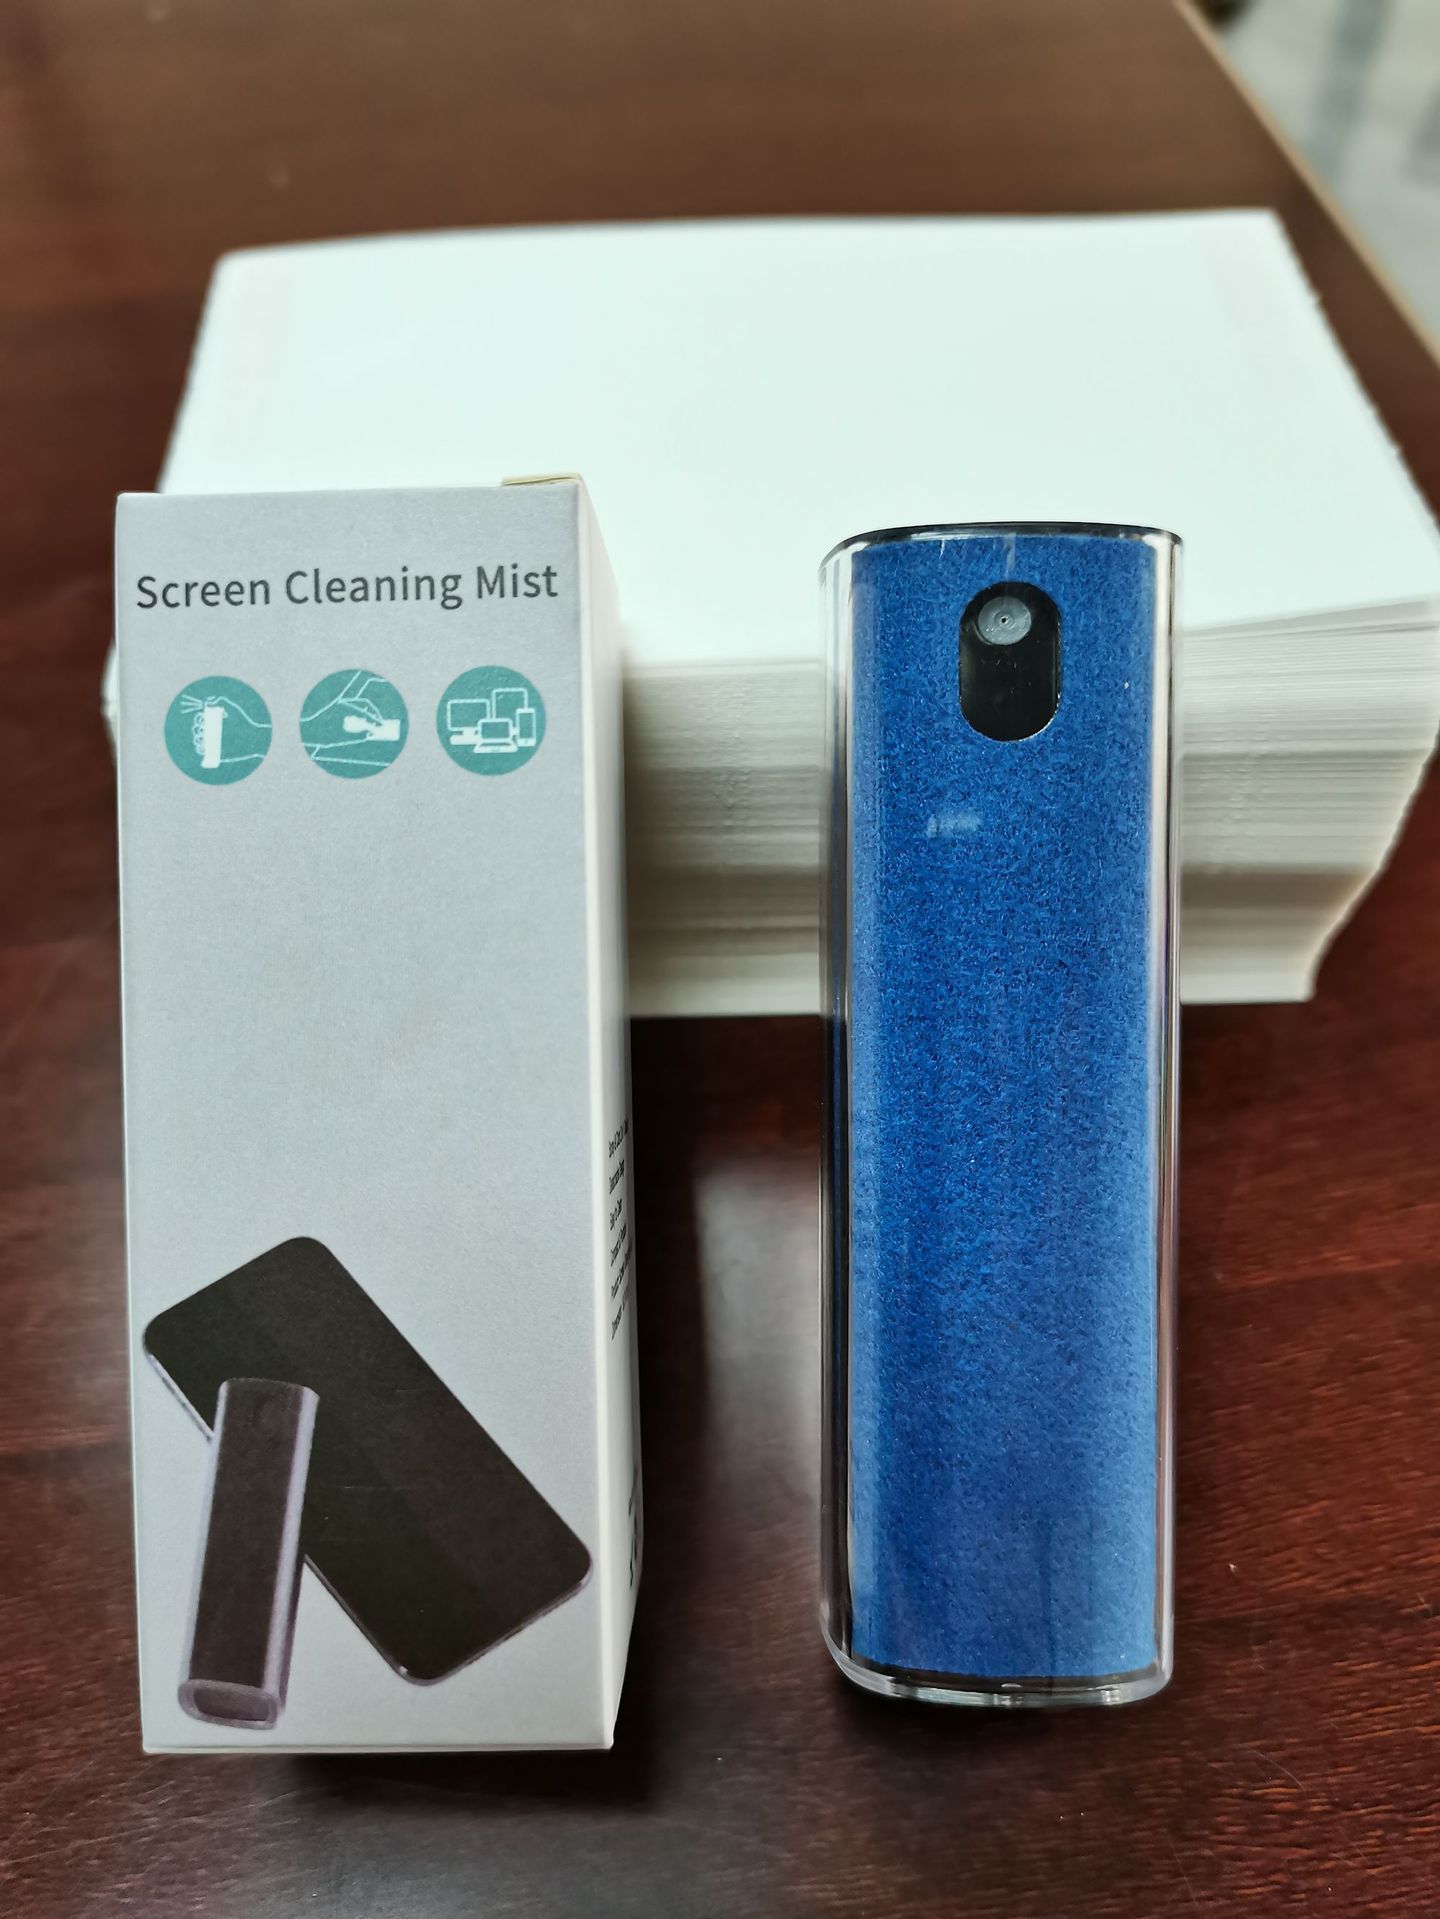 Screen Cleaner Touchscreen Mist Spray-Topselling